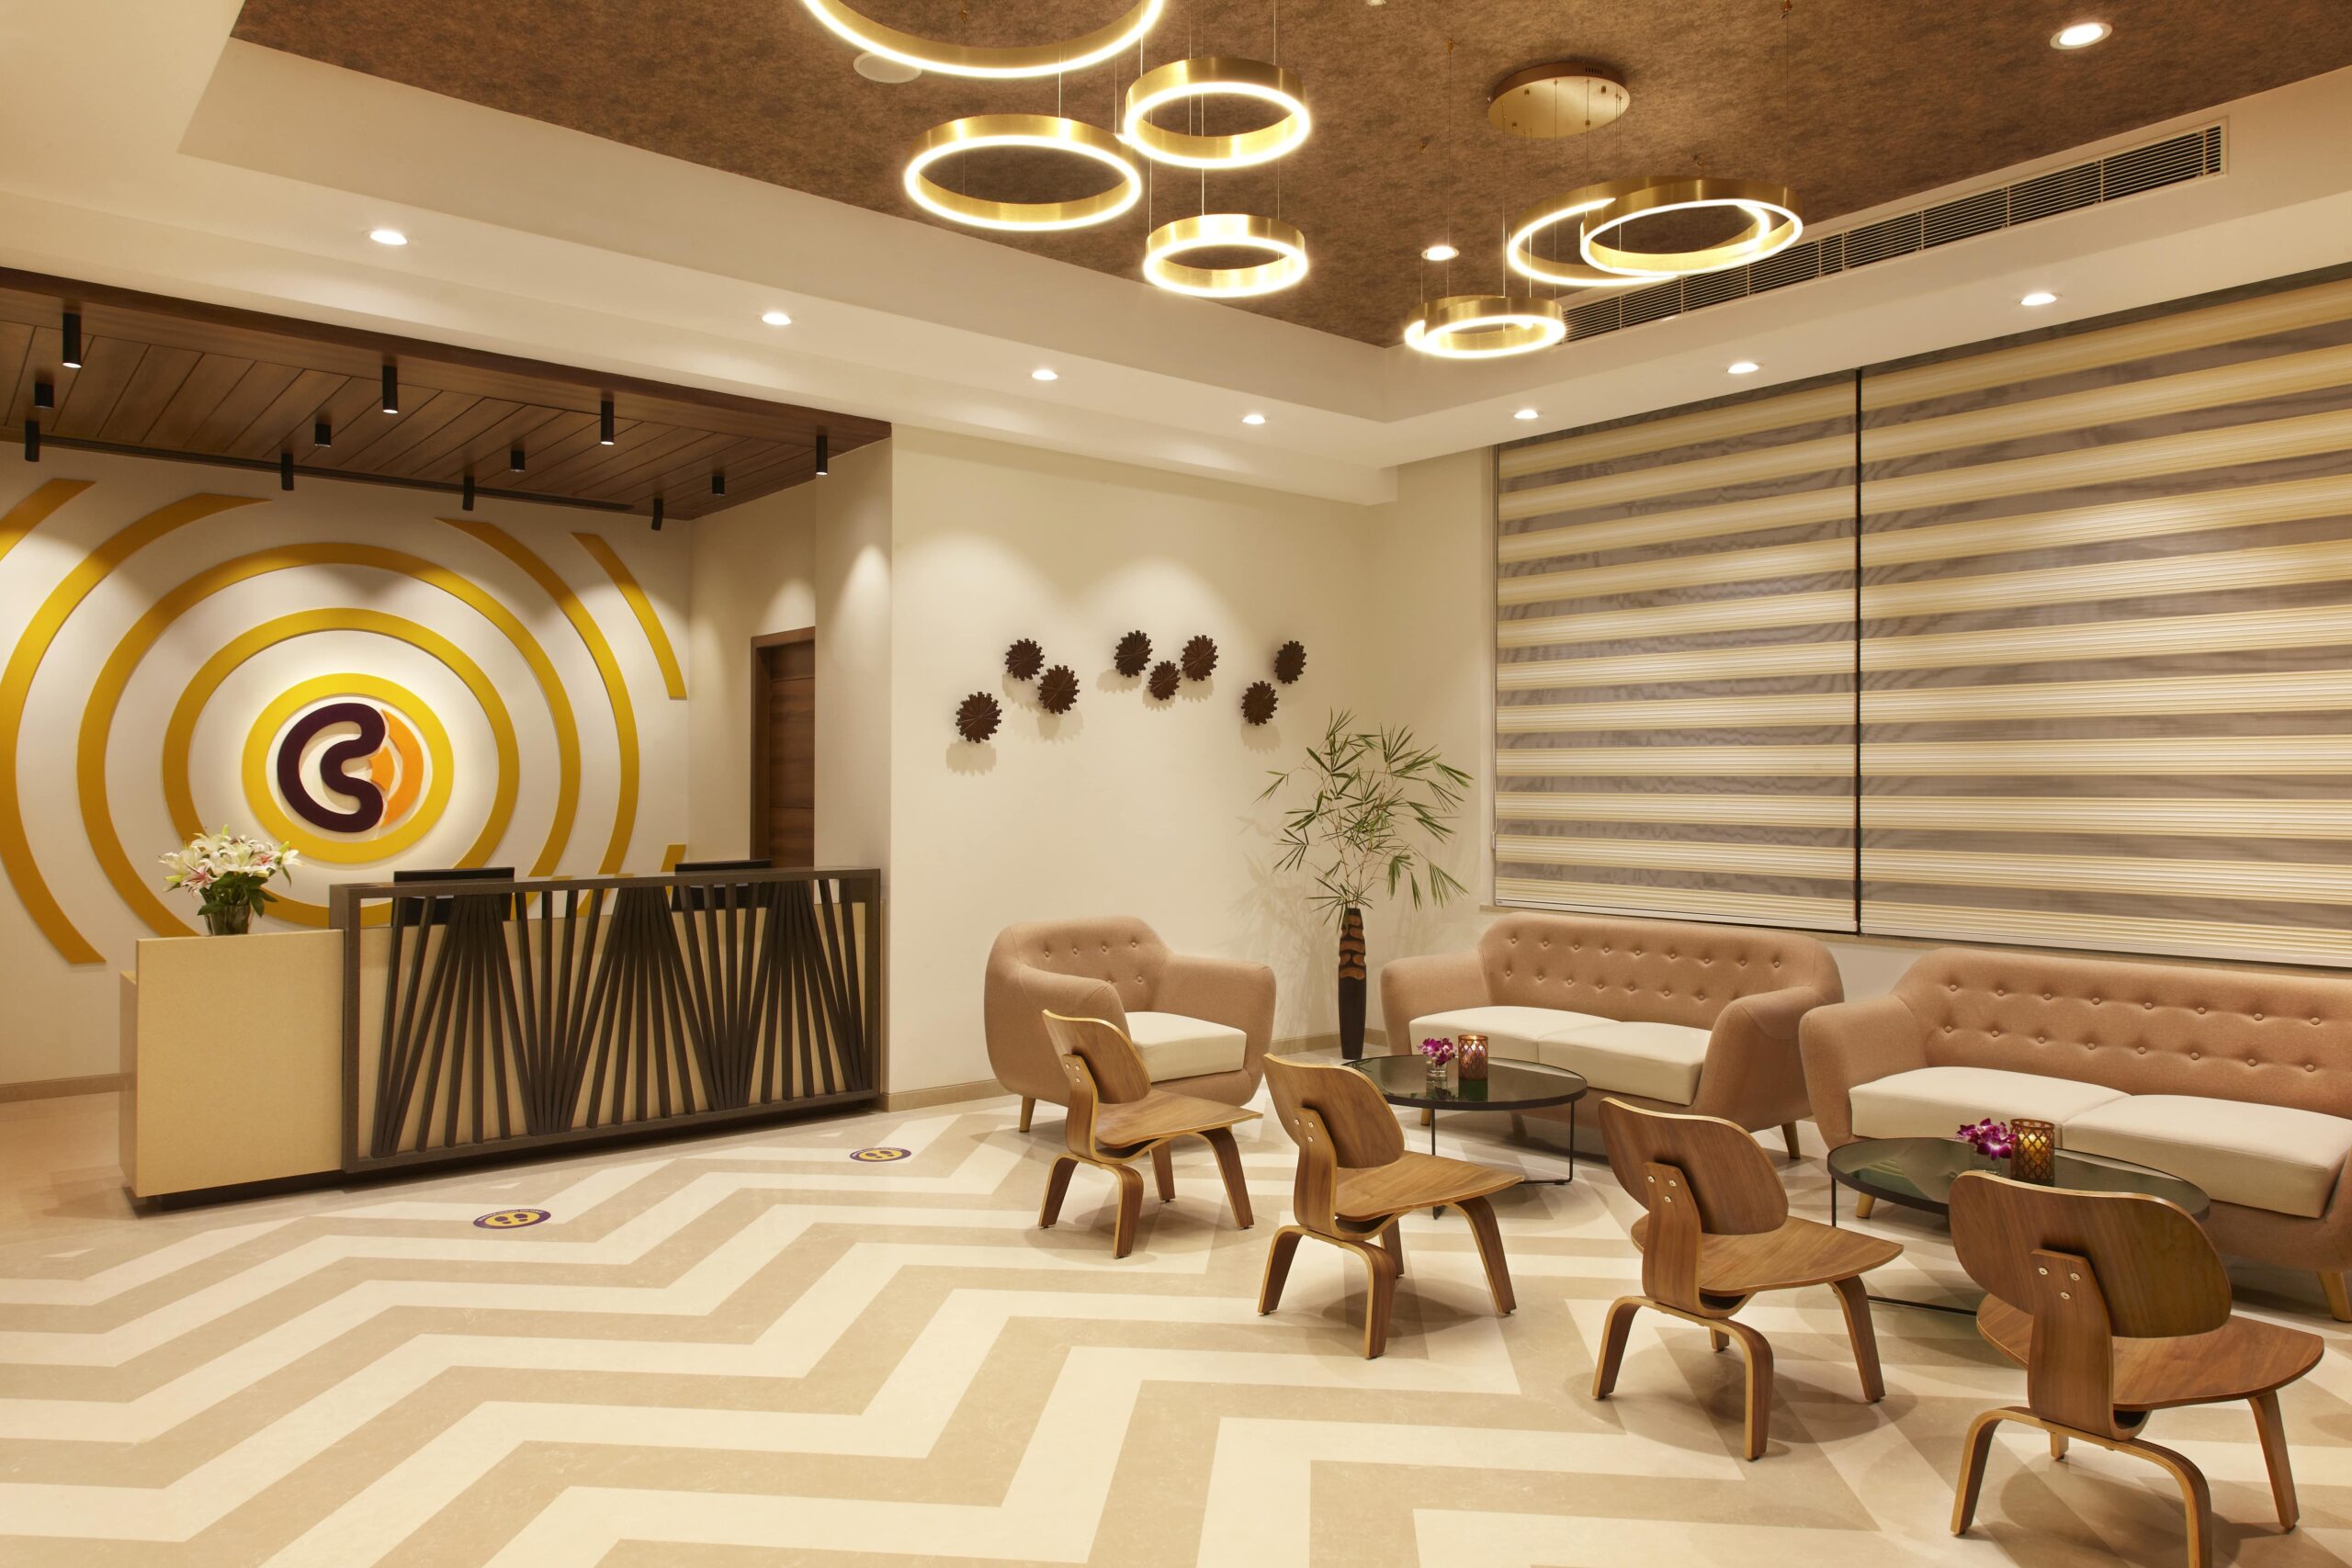 SUBA Group of Hotels expands portfolio with new launch of ‘CLICK Hotel Ayra’ in Bengaluru